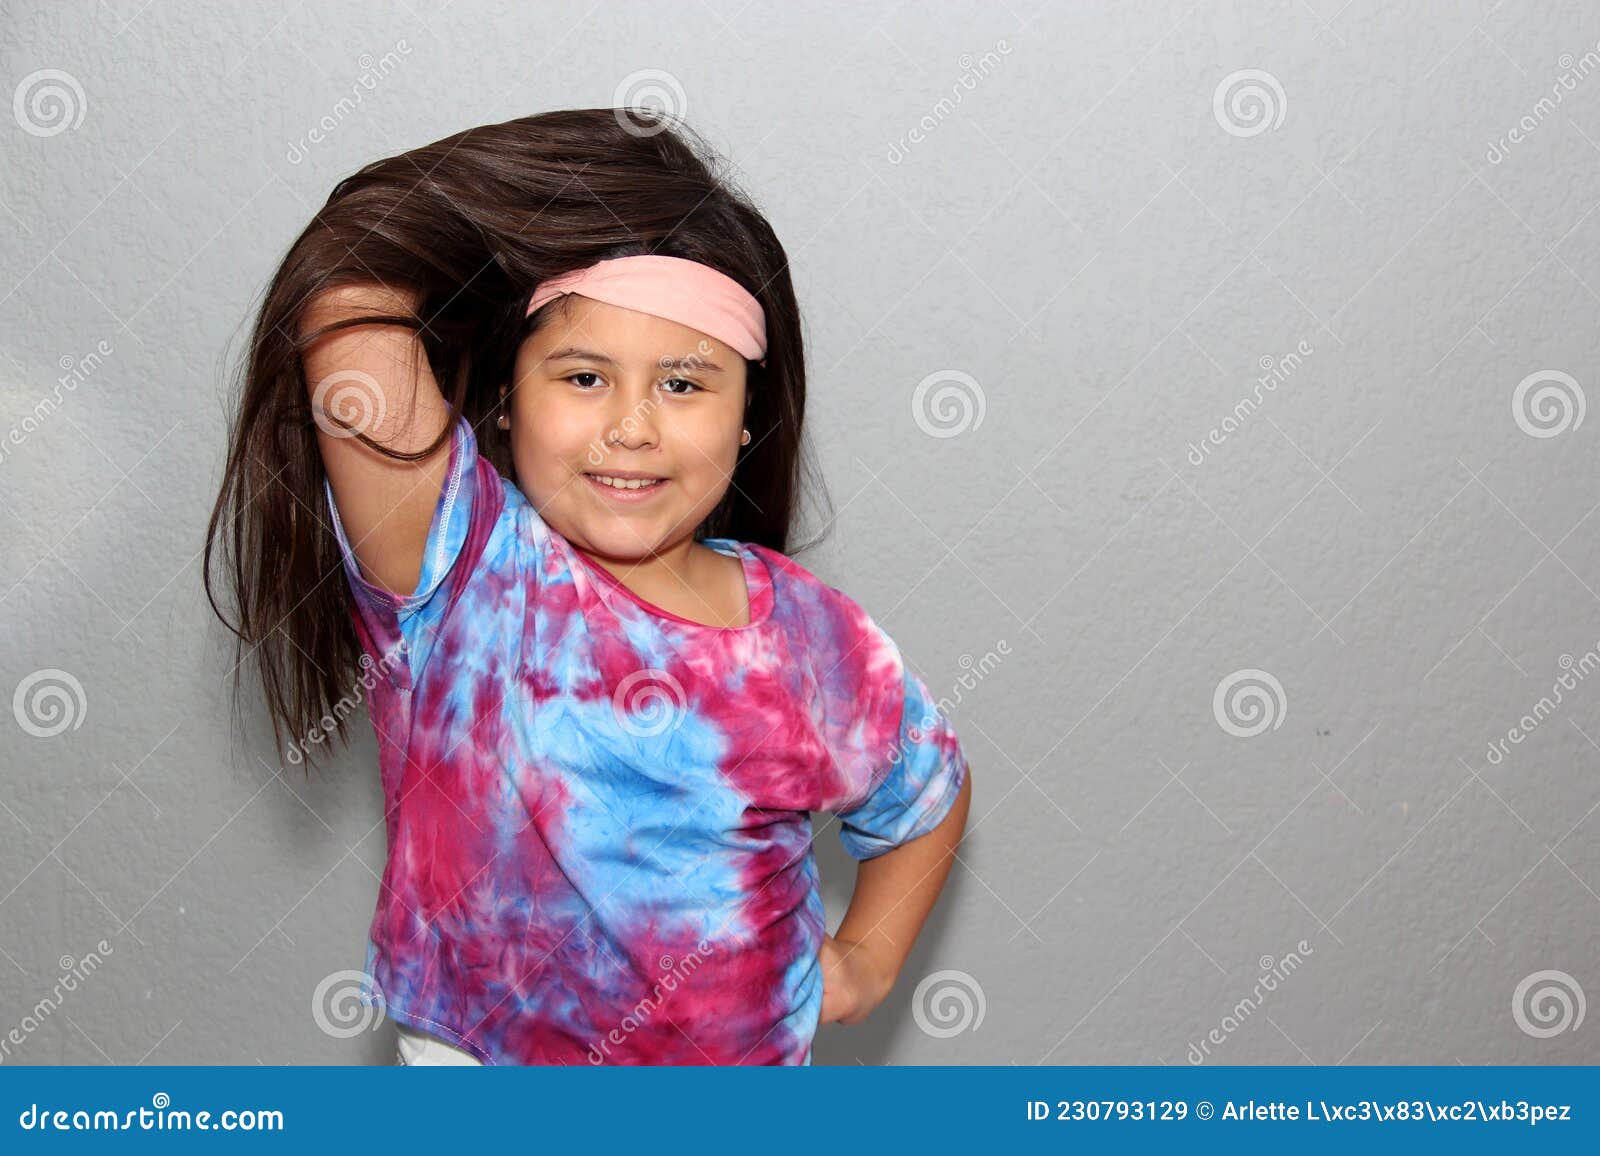 10 Year Old Hispanic Girl with Very Long Black Straight Hair Modeling  Happily for the Camera in a Tie Dye Style Shirt Stock Image - Image of  cute, people: 230793129